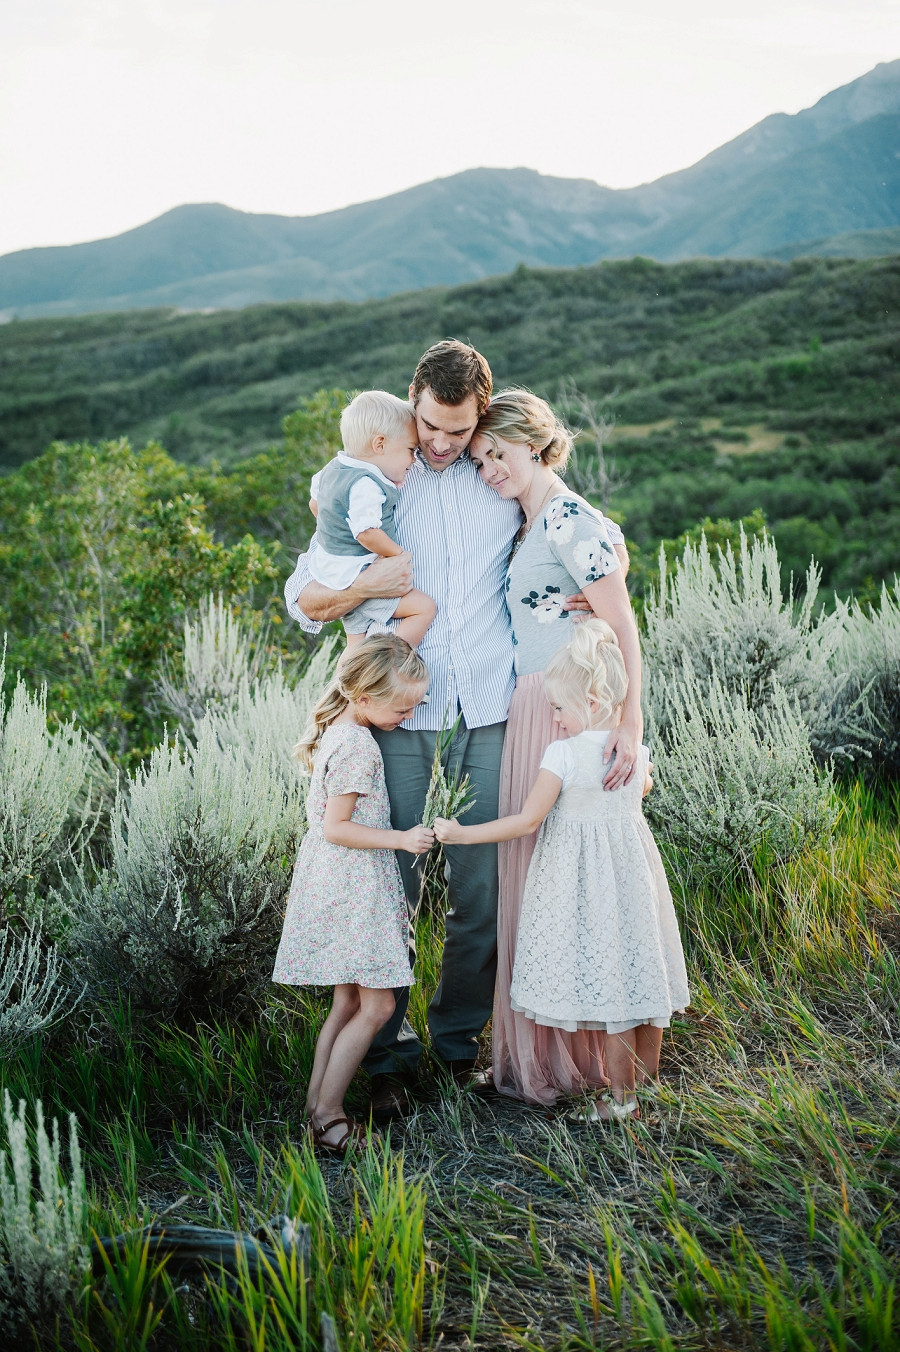 Summer Family Picture Outfit Ideas
 Beautiful Hillside Family s by Lori Romney